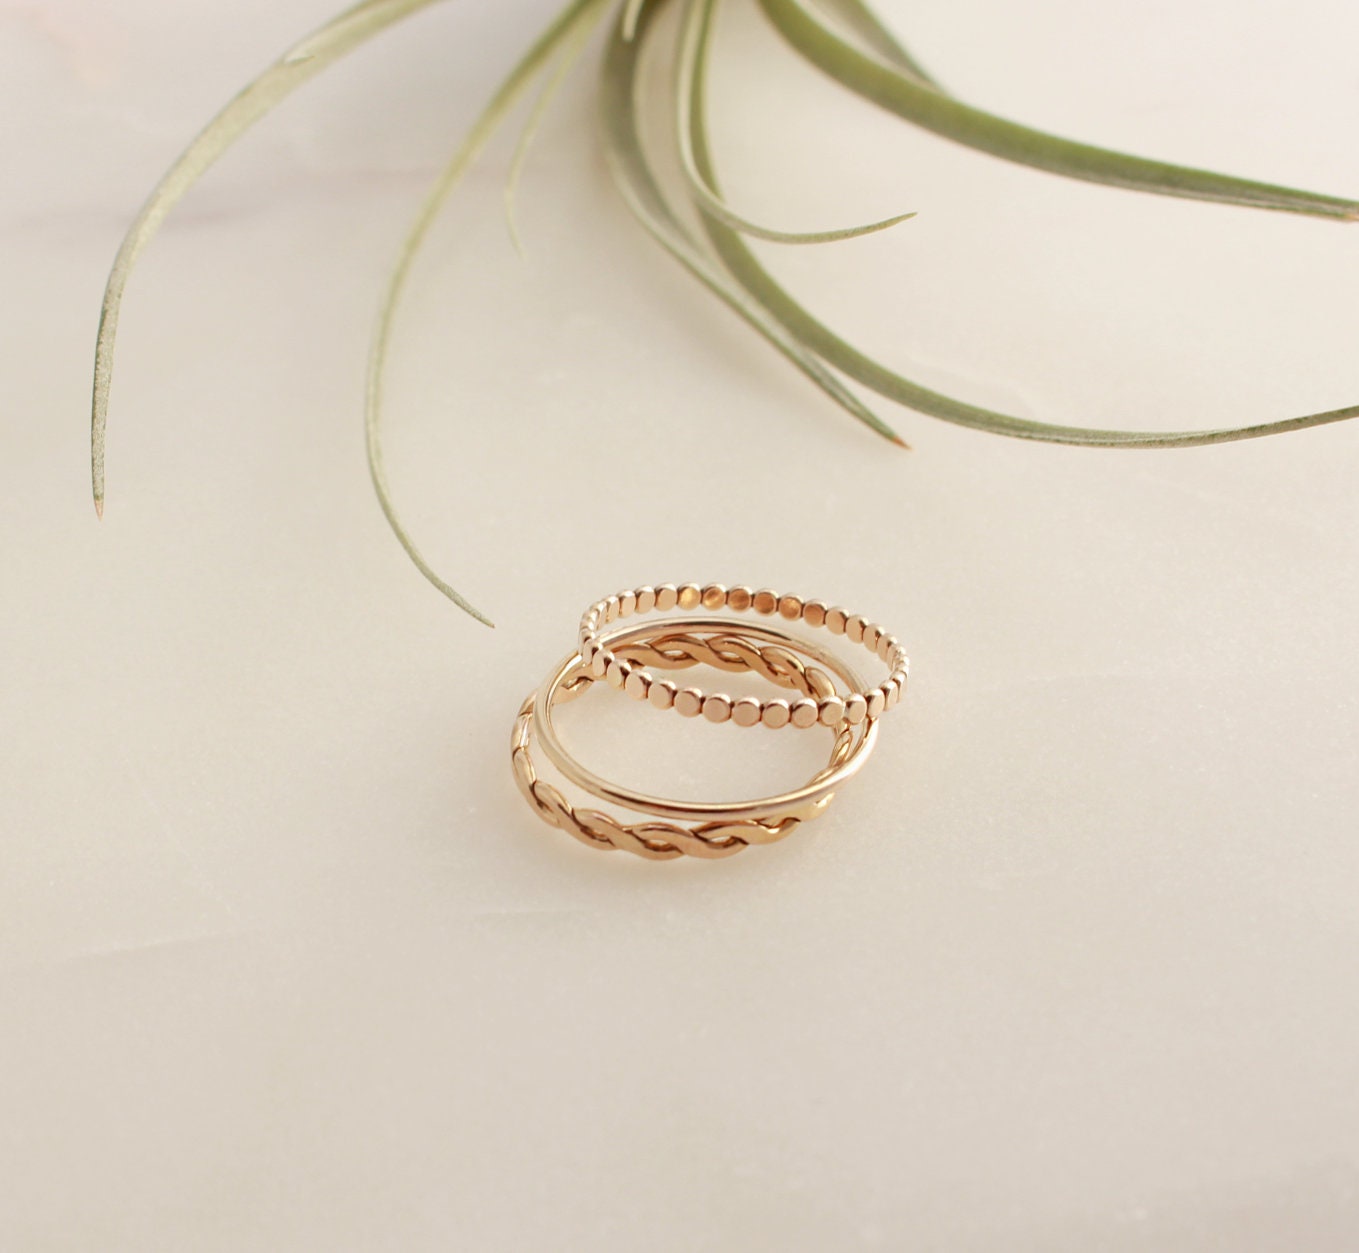 Woven Ring  - 14k Gold Filled. Thickness 2.4mm, Stacking, Layering, Woven Twisted Gold Filled Ring